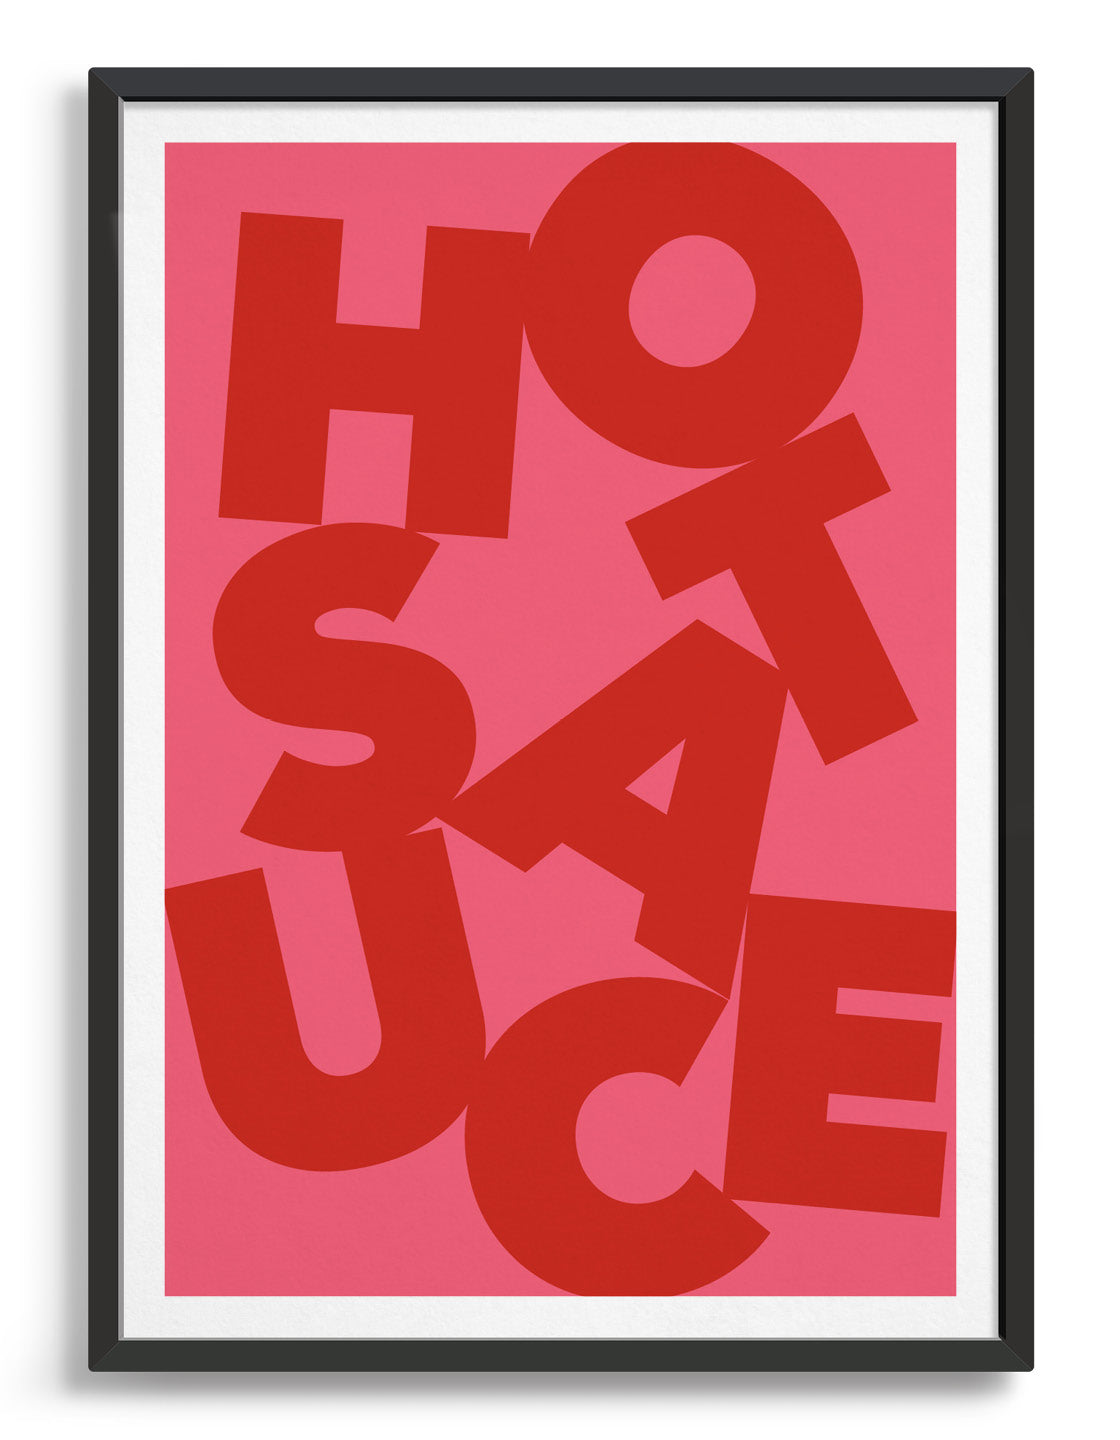 Framed typography art print of the word Hot Sauce in red text against a pink background